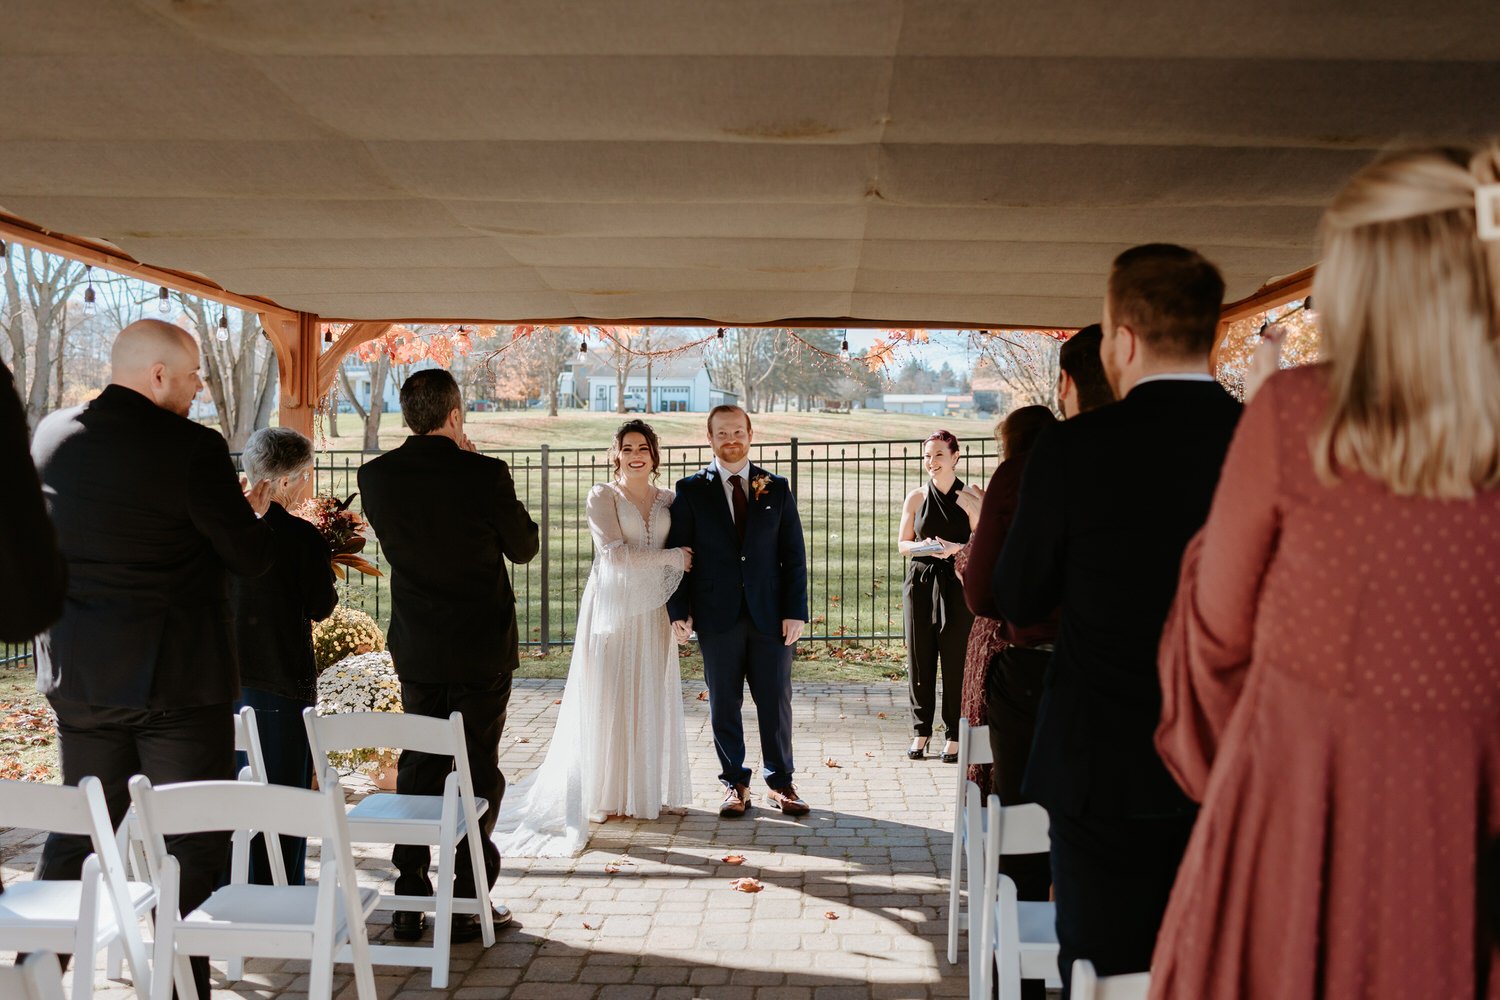 Bride and groom stand in front of guests after saying I do.